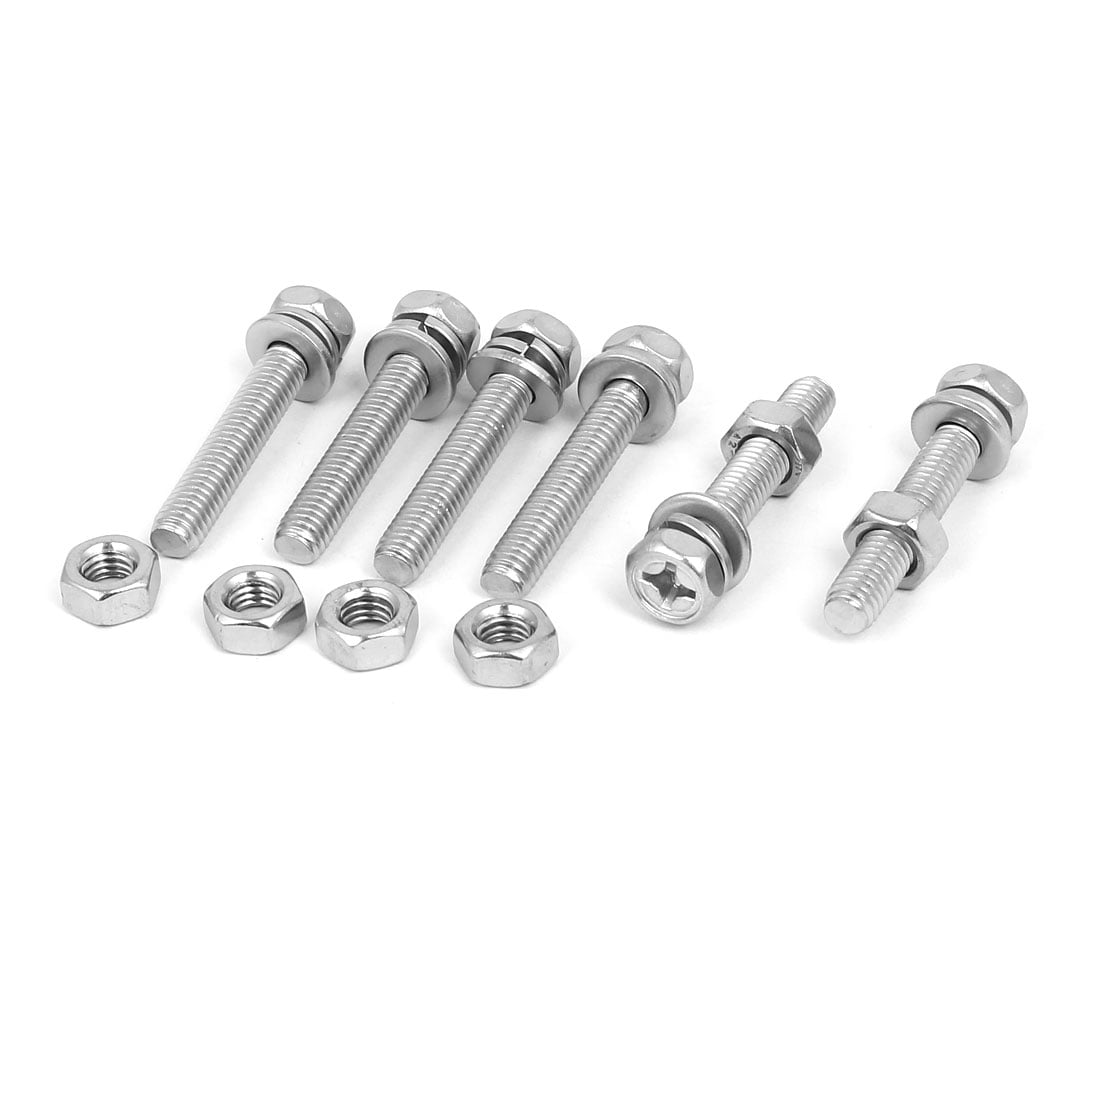 M6 Stainless Steel Bolts and Nuts with Washers A2 Stainless Pack of 6 12 or 24 